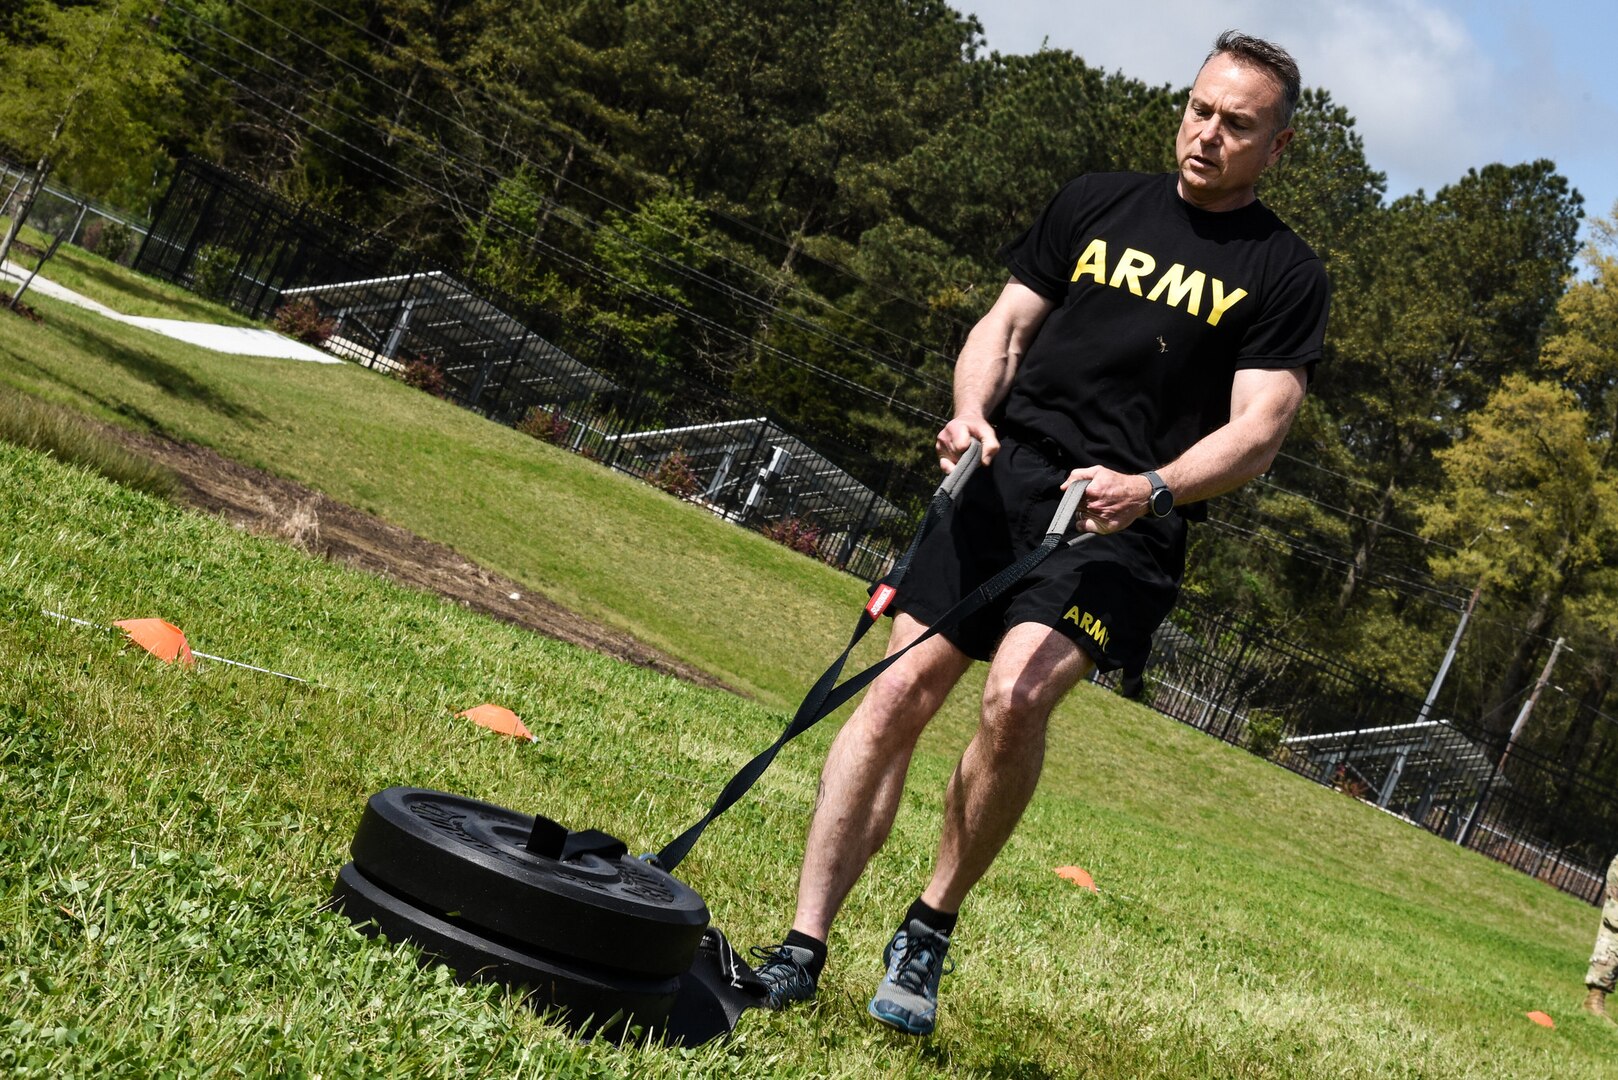 Soldiers assigned to the Virginia National Guard’s Joint Force Headquarters participate in an Army Combat Fitness Test familiarization event April 11, 2021, at Defense Supply Center Richmond, Virginia. (U.S. Army National Guard photo by Sgt. 1st Class Terra C. Gatti)